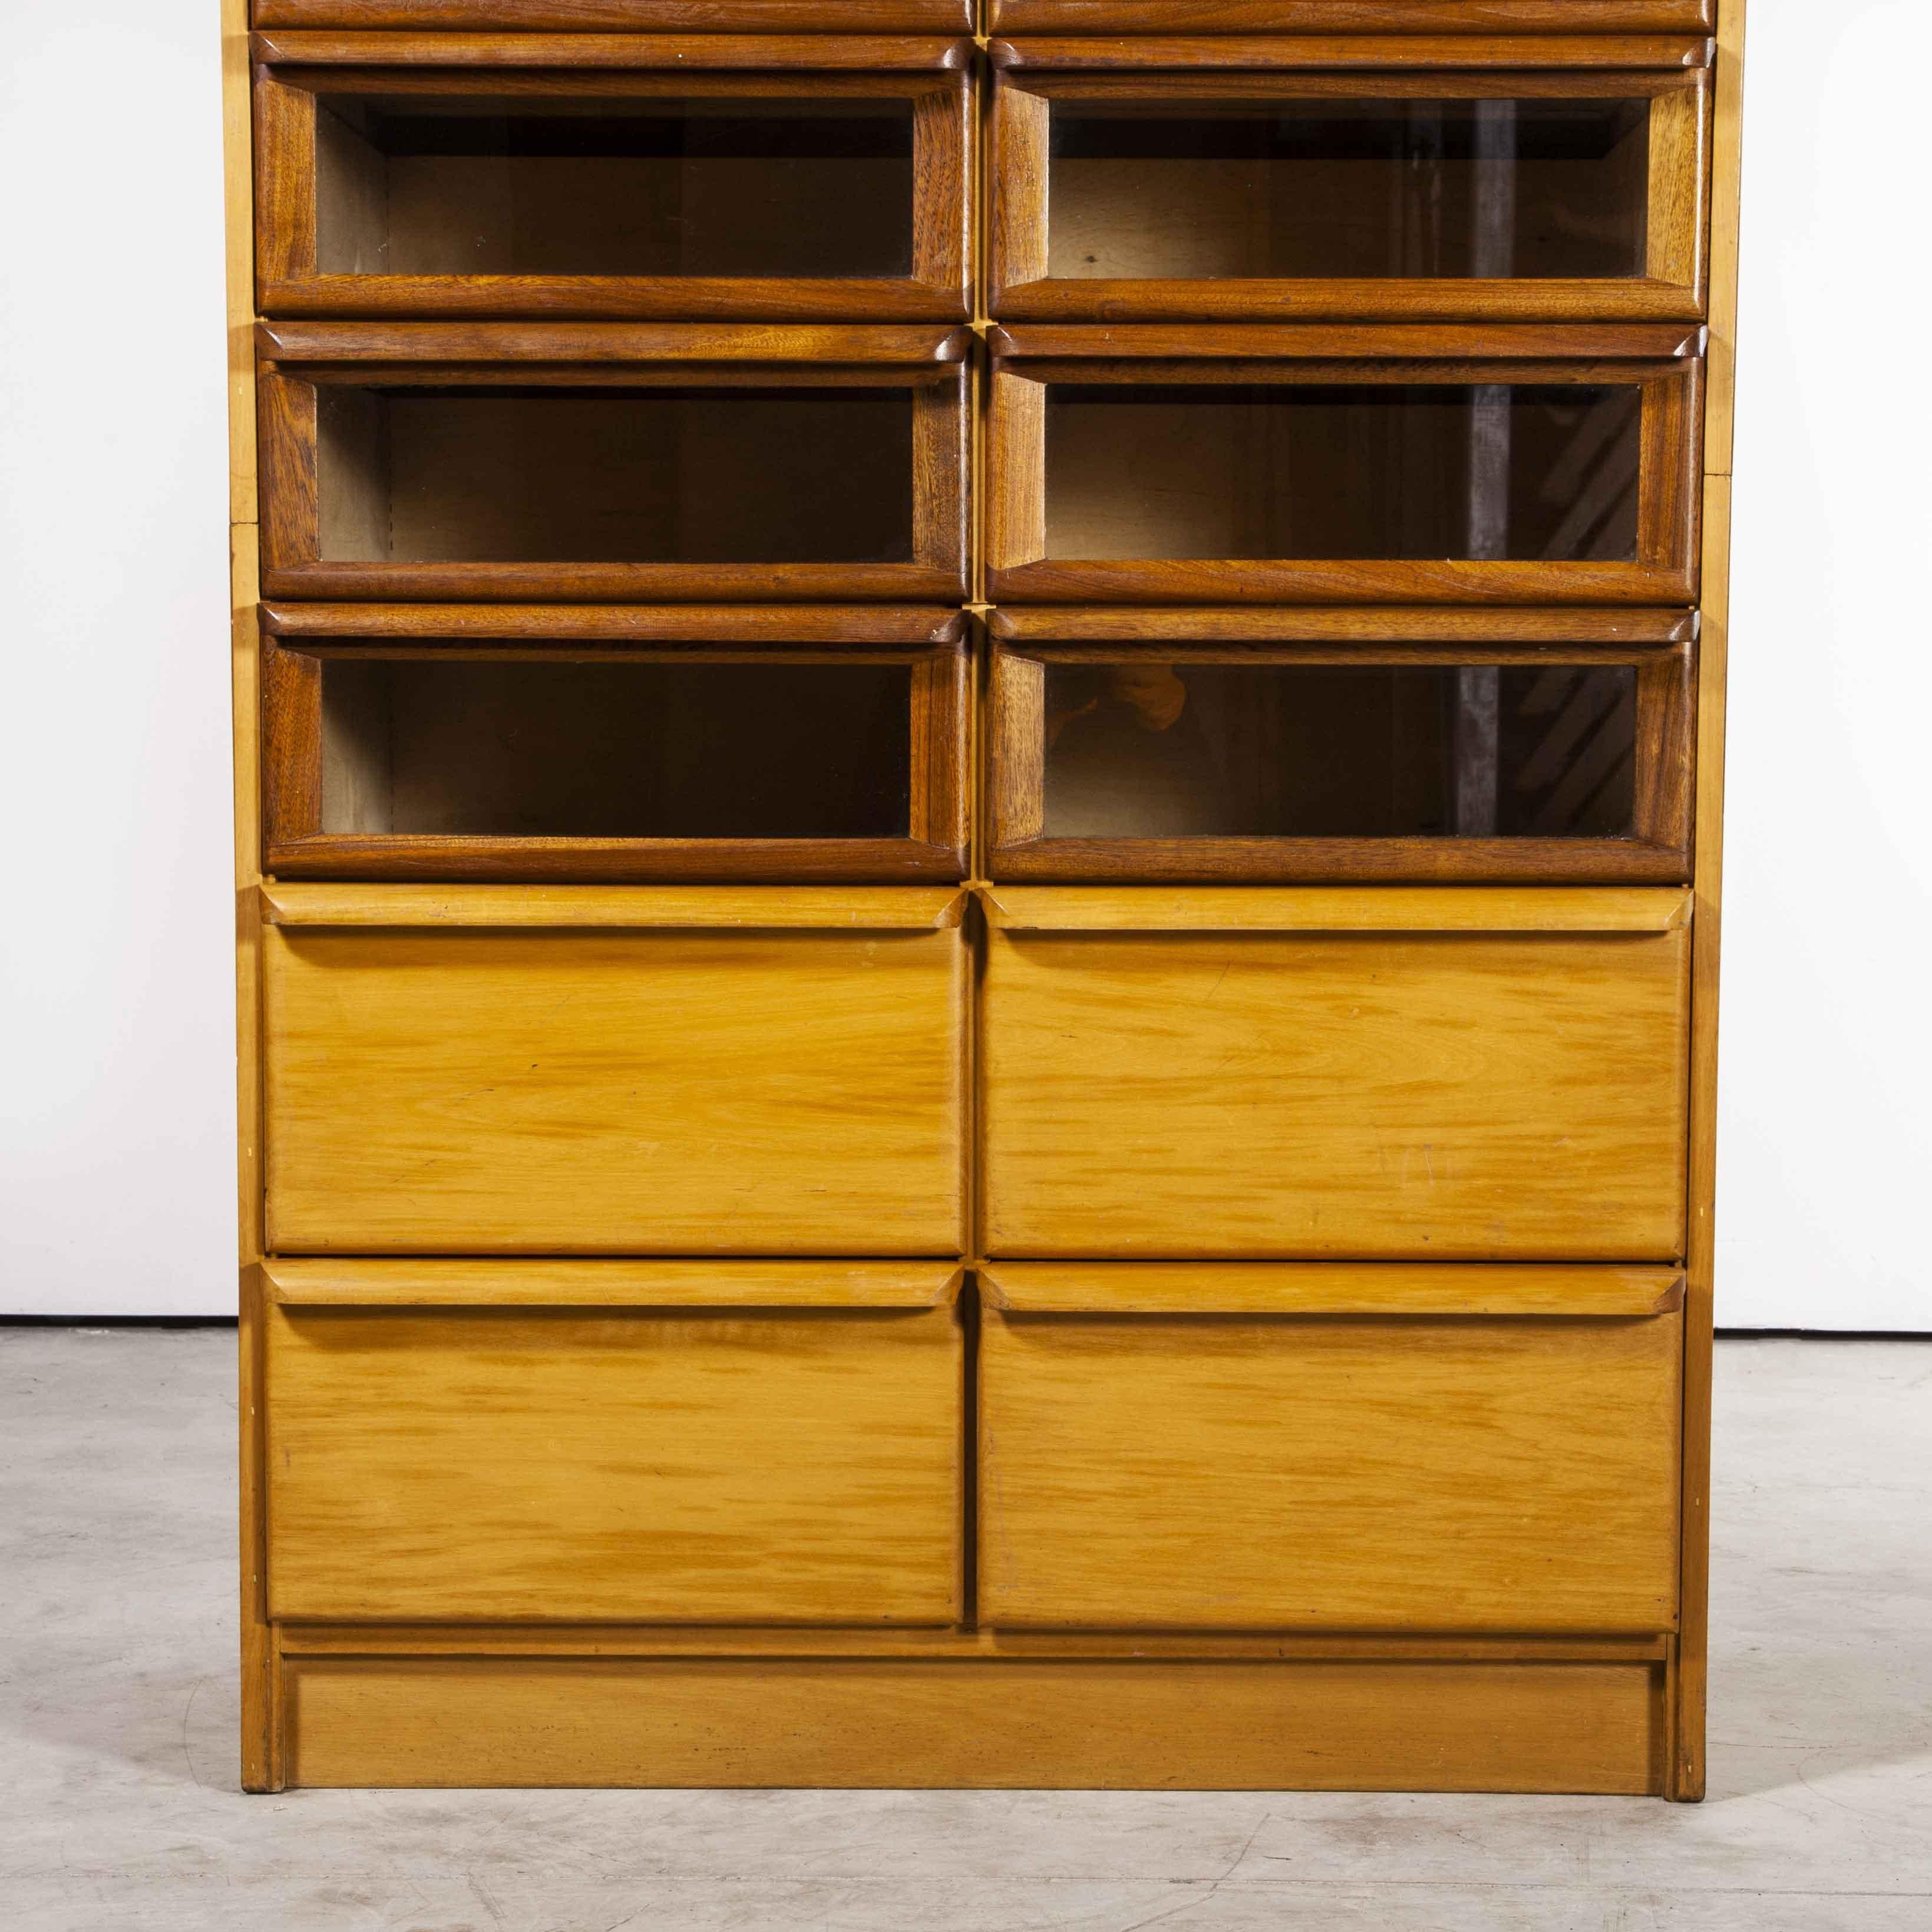 shelving unit with drawers